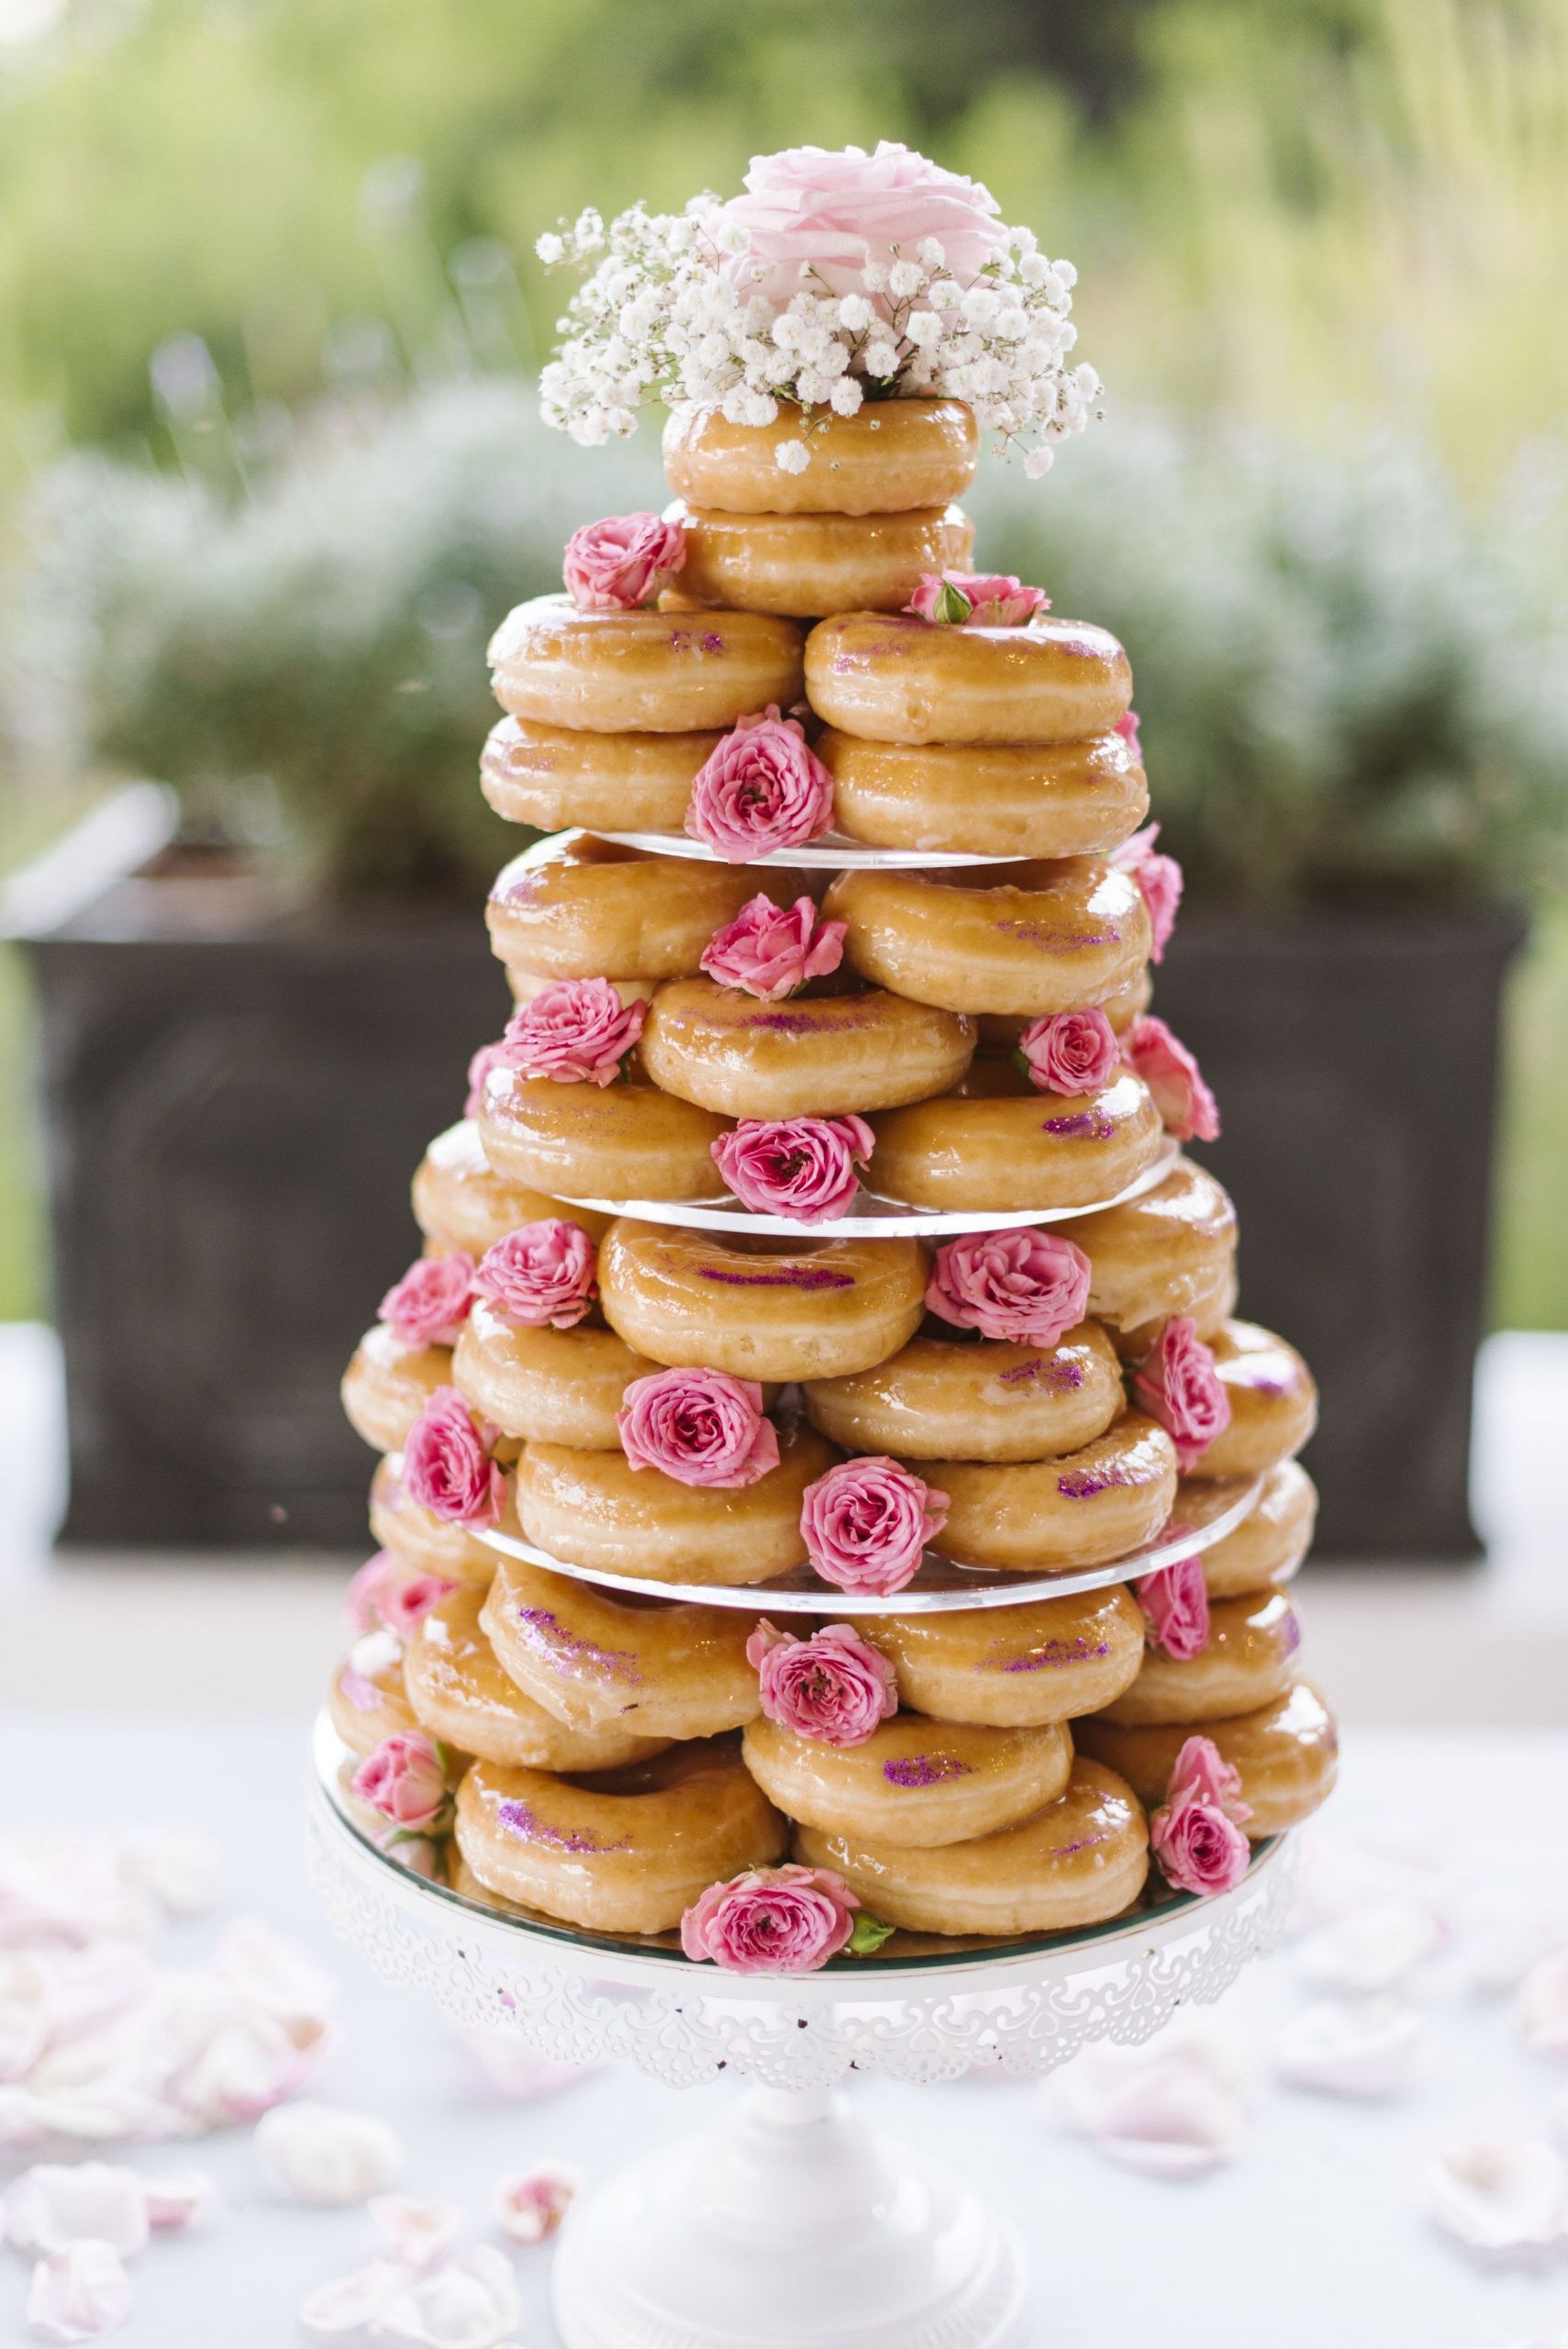 Donut Wedding Cake
 Pin by Jessica Armstrong on Wedding Ideas in 2019